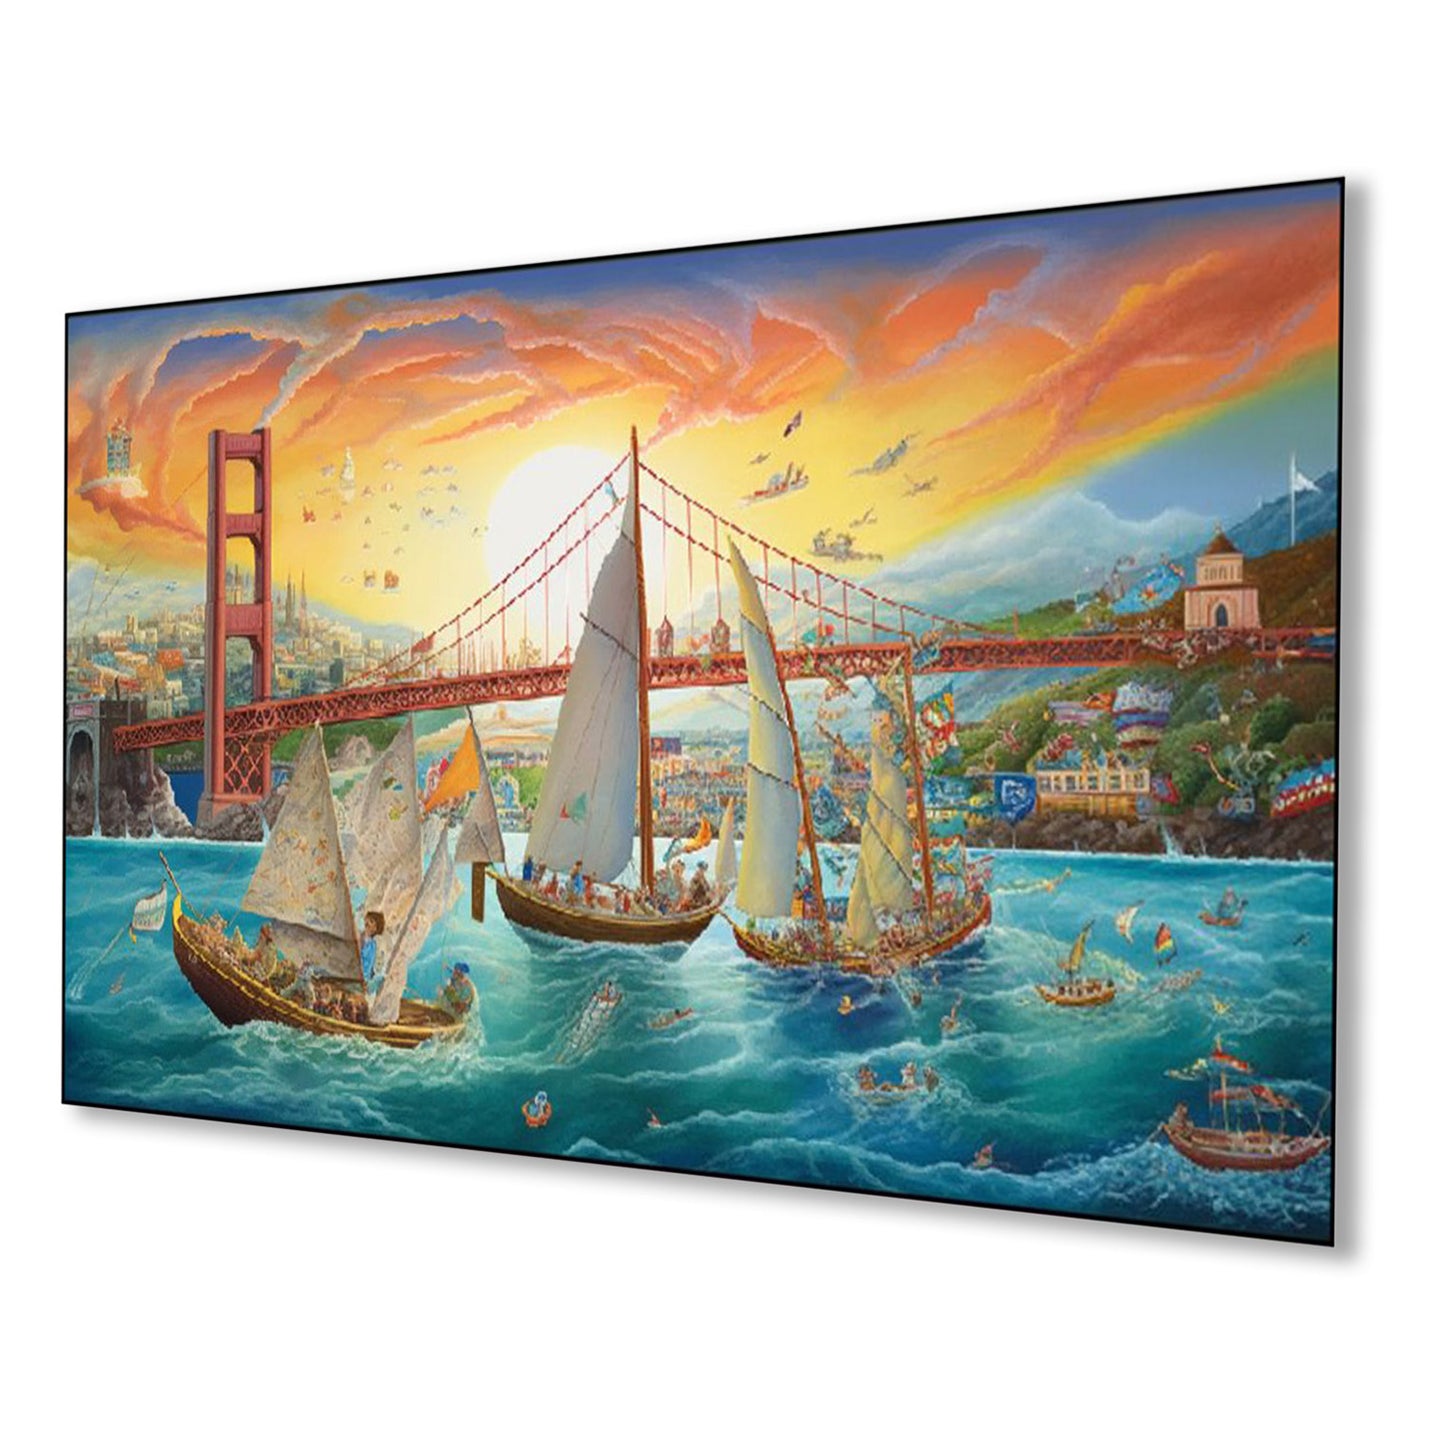 Tranquil Waters: Boats and Bridge Wall Painting